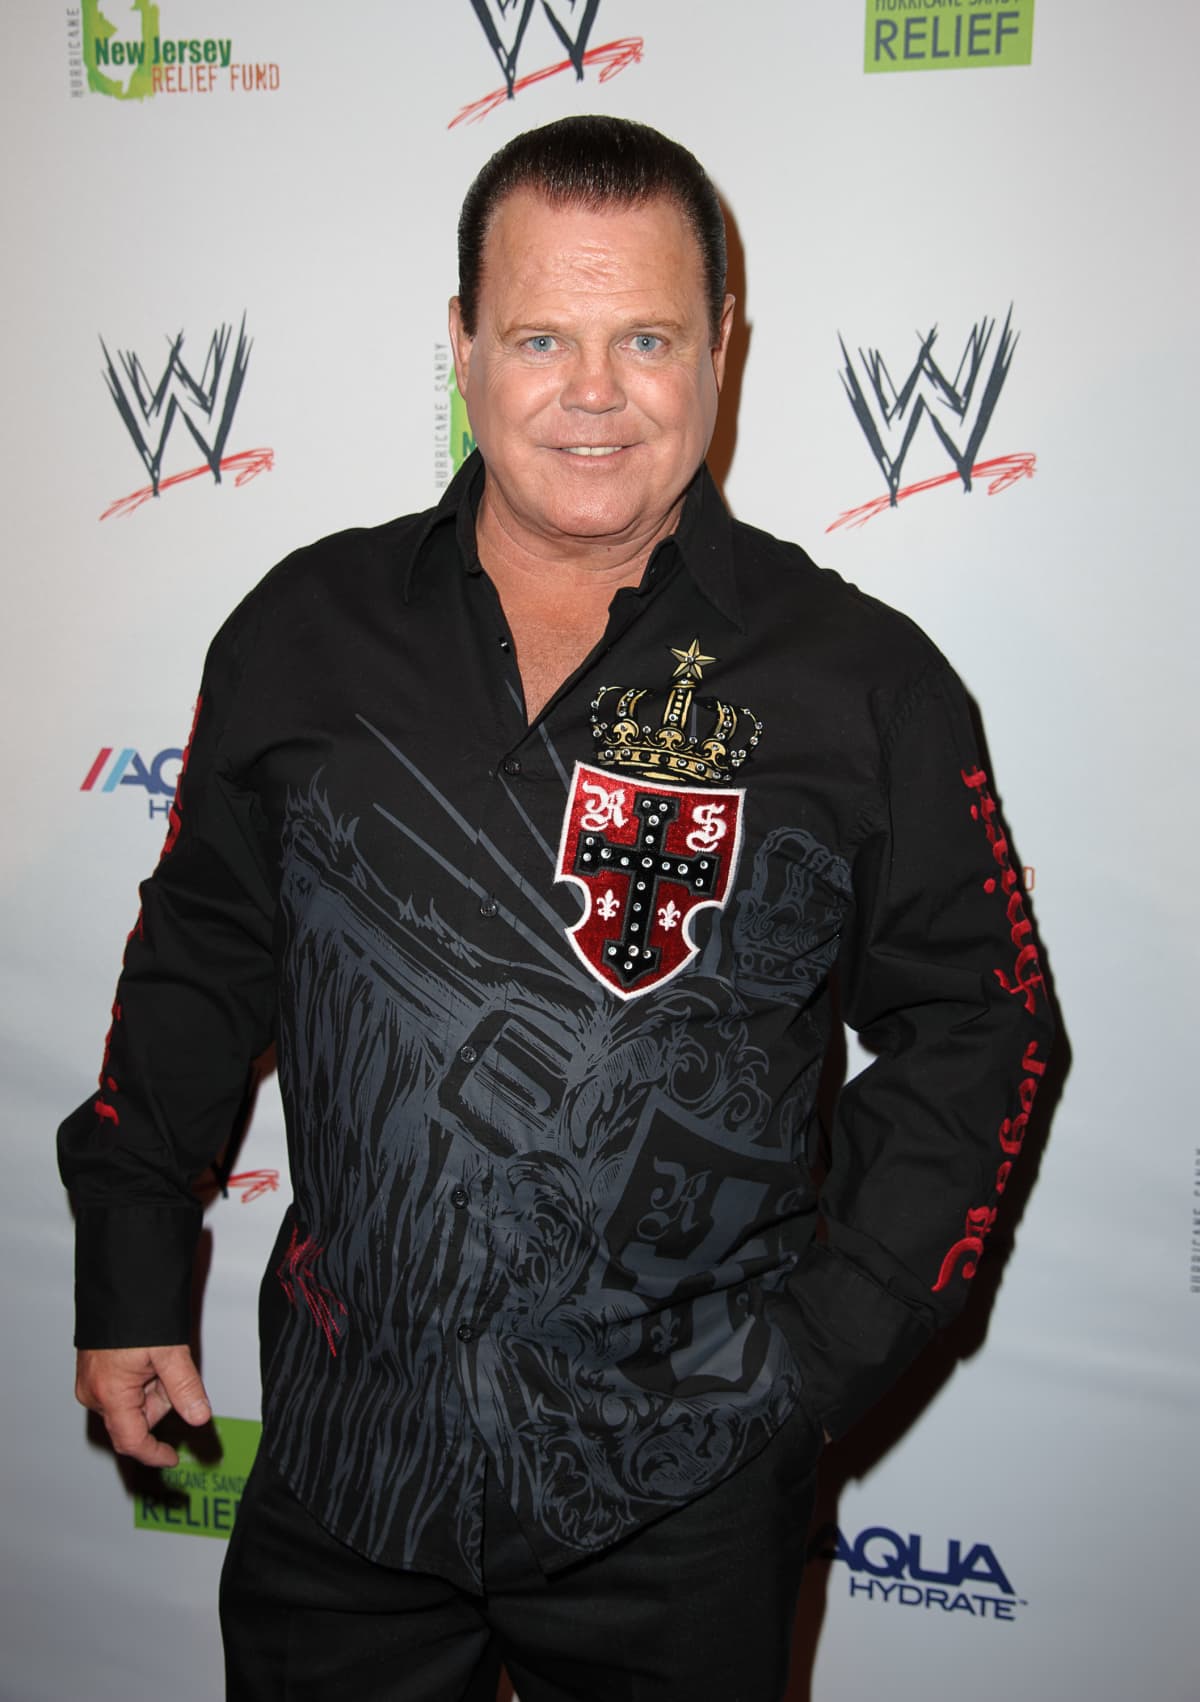 NEW YORK, NY - APRIL 04:  Jerry "The King" Lawler attends the Superstars For Sandy Relief at Cipriani Wall Street on April 4, 2013 in New York City.  (Photo by Dave Kotinsky/FilmMagic)